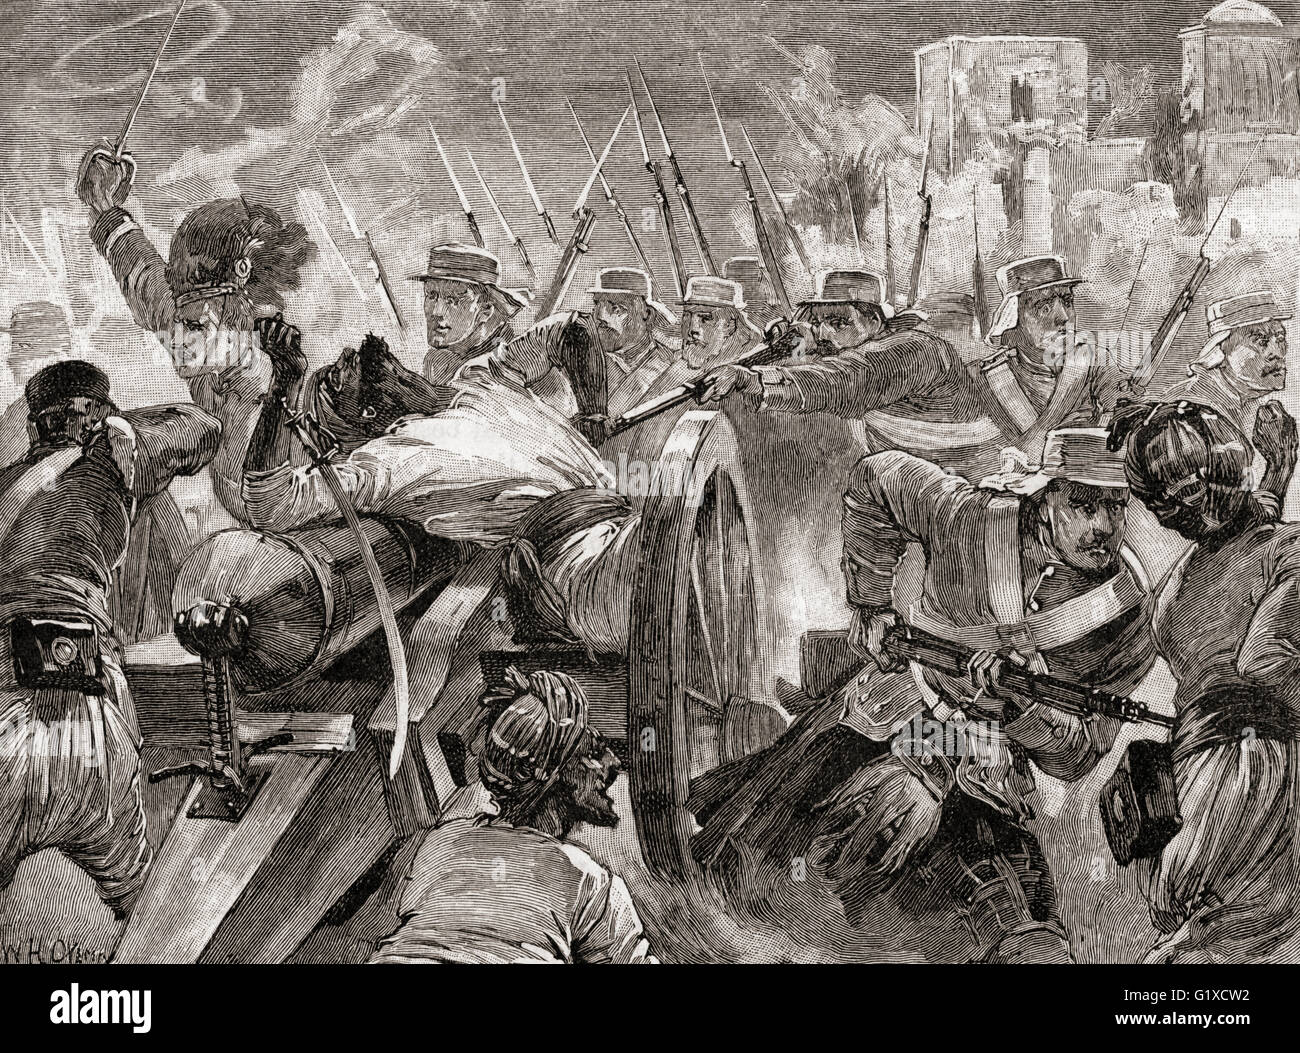 Soldiers under the command of Major General Sir Henry Havelock recapture the guns at Cawnpore from rebels during the Indian Mutiny of 1857. Stock Photo